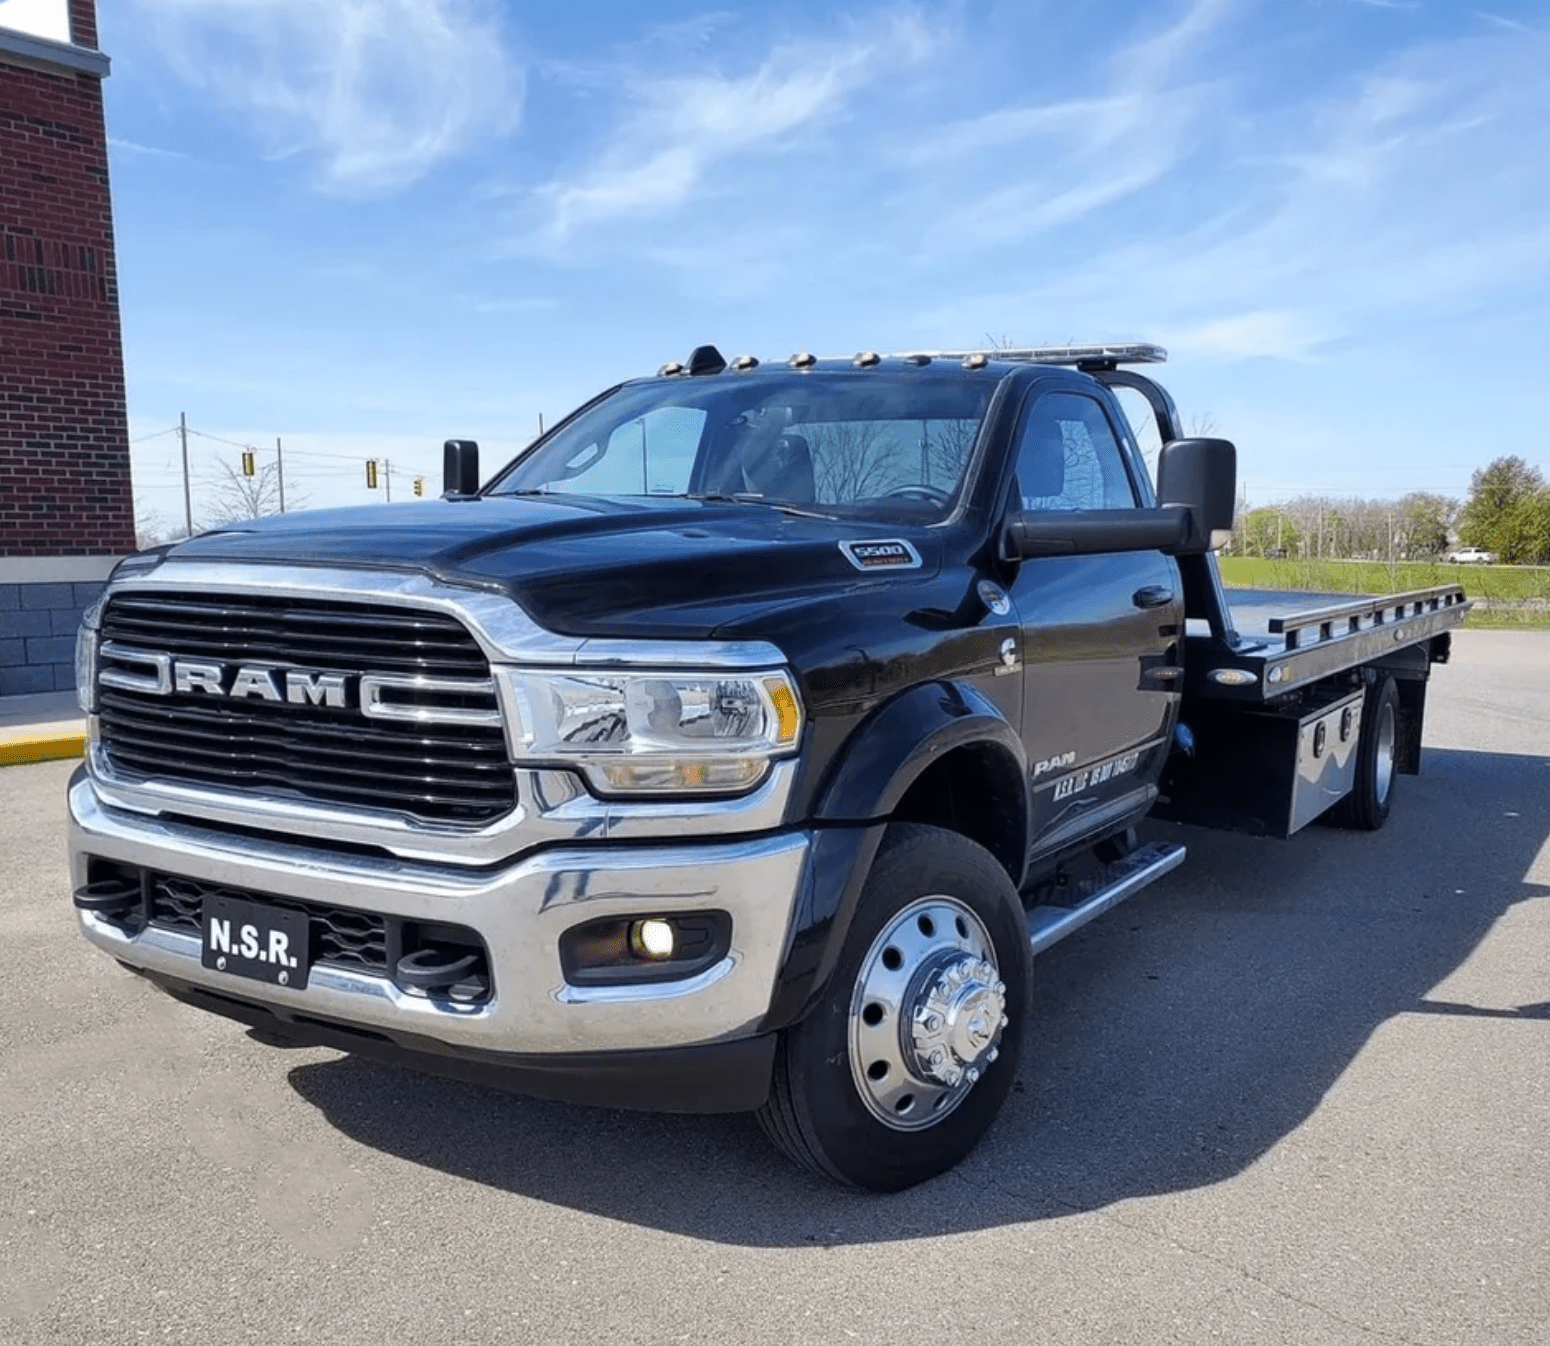 North Star Recovery Vehicle Repo Company in West Michigan - NorthStarRecoveryLLC.com